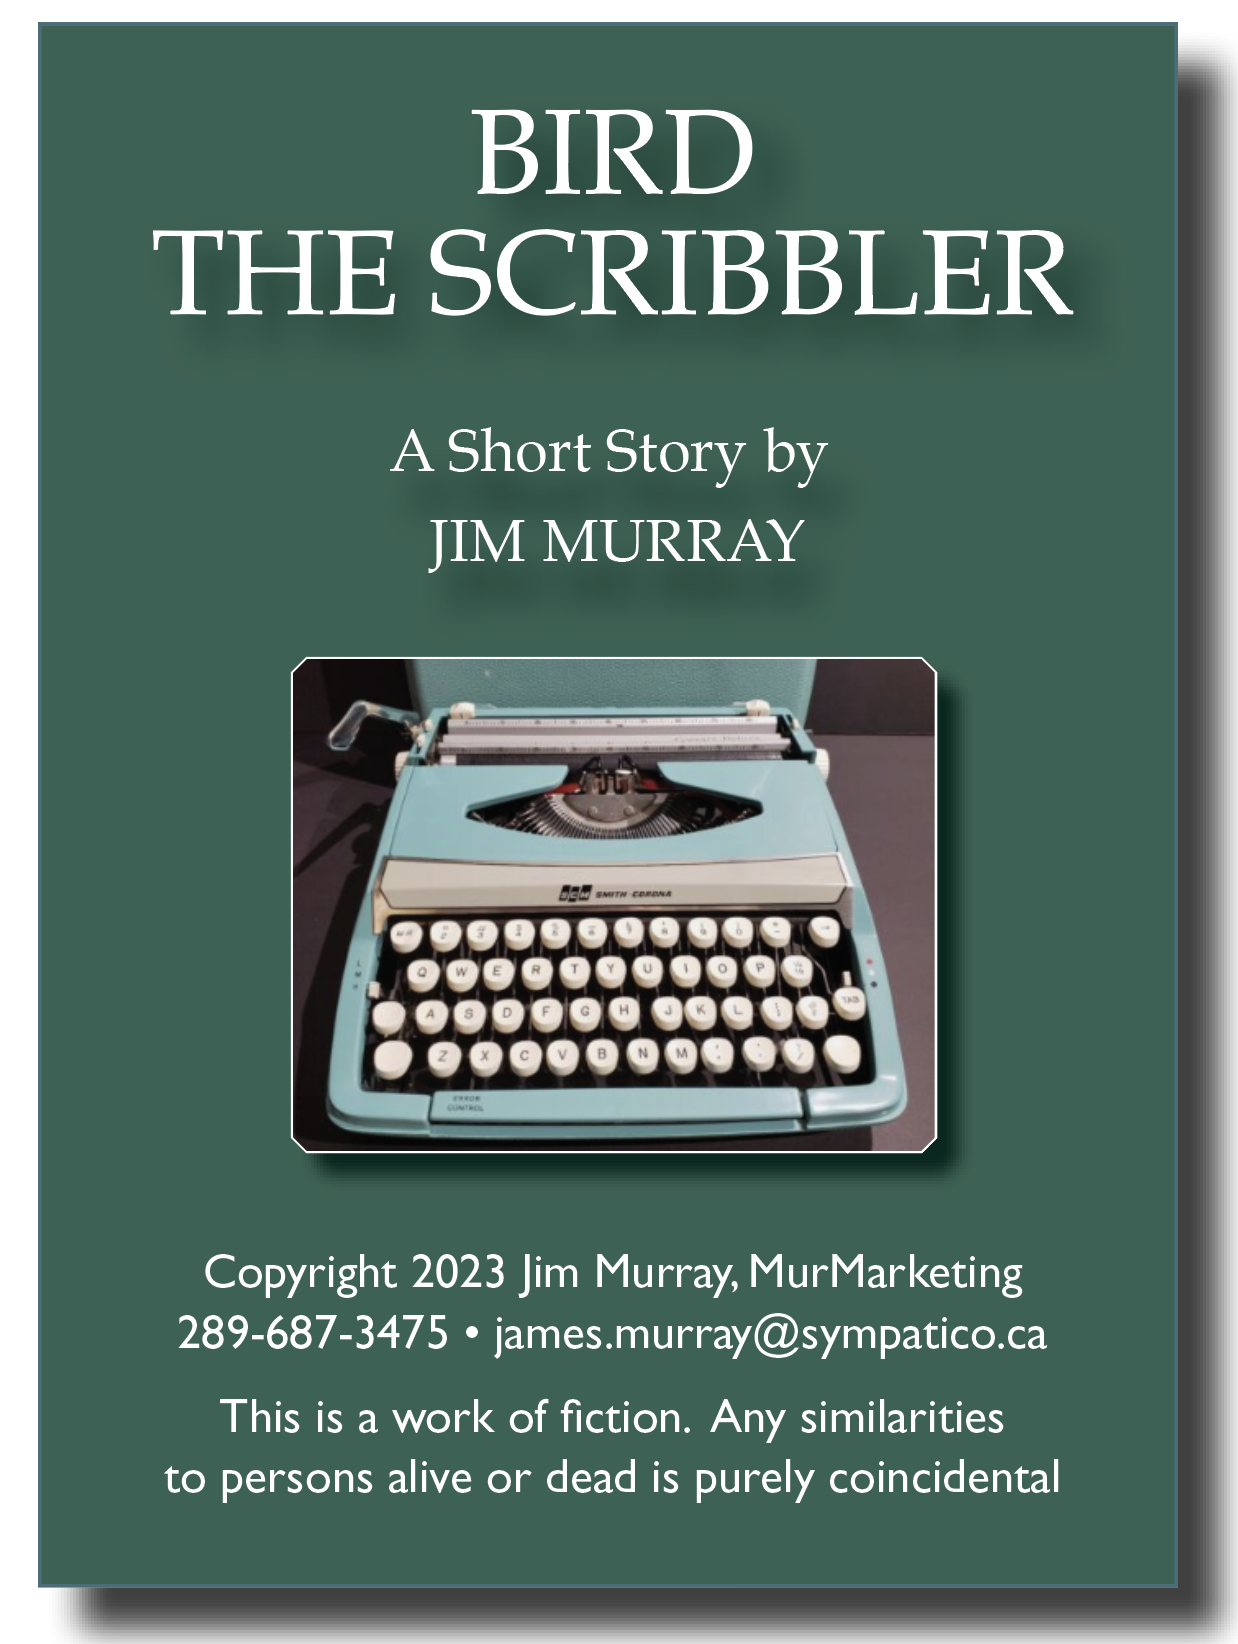 31140,
THE SCRIBBLER

A Short Story by
JIM MURRAY

 

YY Y III had
999009900009
PEAY XT
© 00000000999
ERE AY

 

Copyright 2023 Jim Murray, MurMarketing
289-687-3475 * james.murray@sympatico.ca

This is a work of fiction. Any similarities
to persons alive or dead is purely coincidental